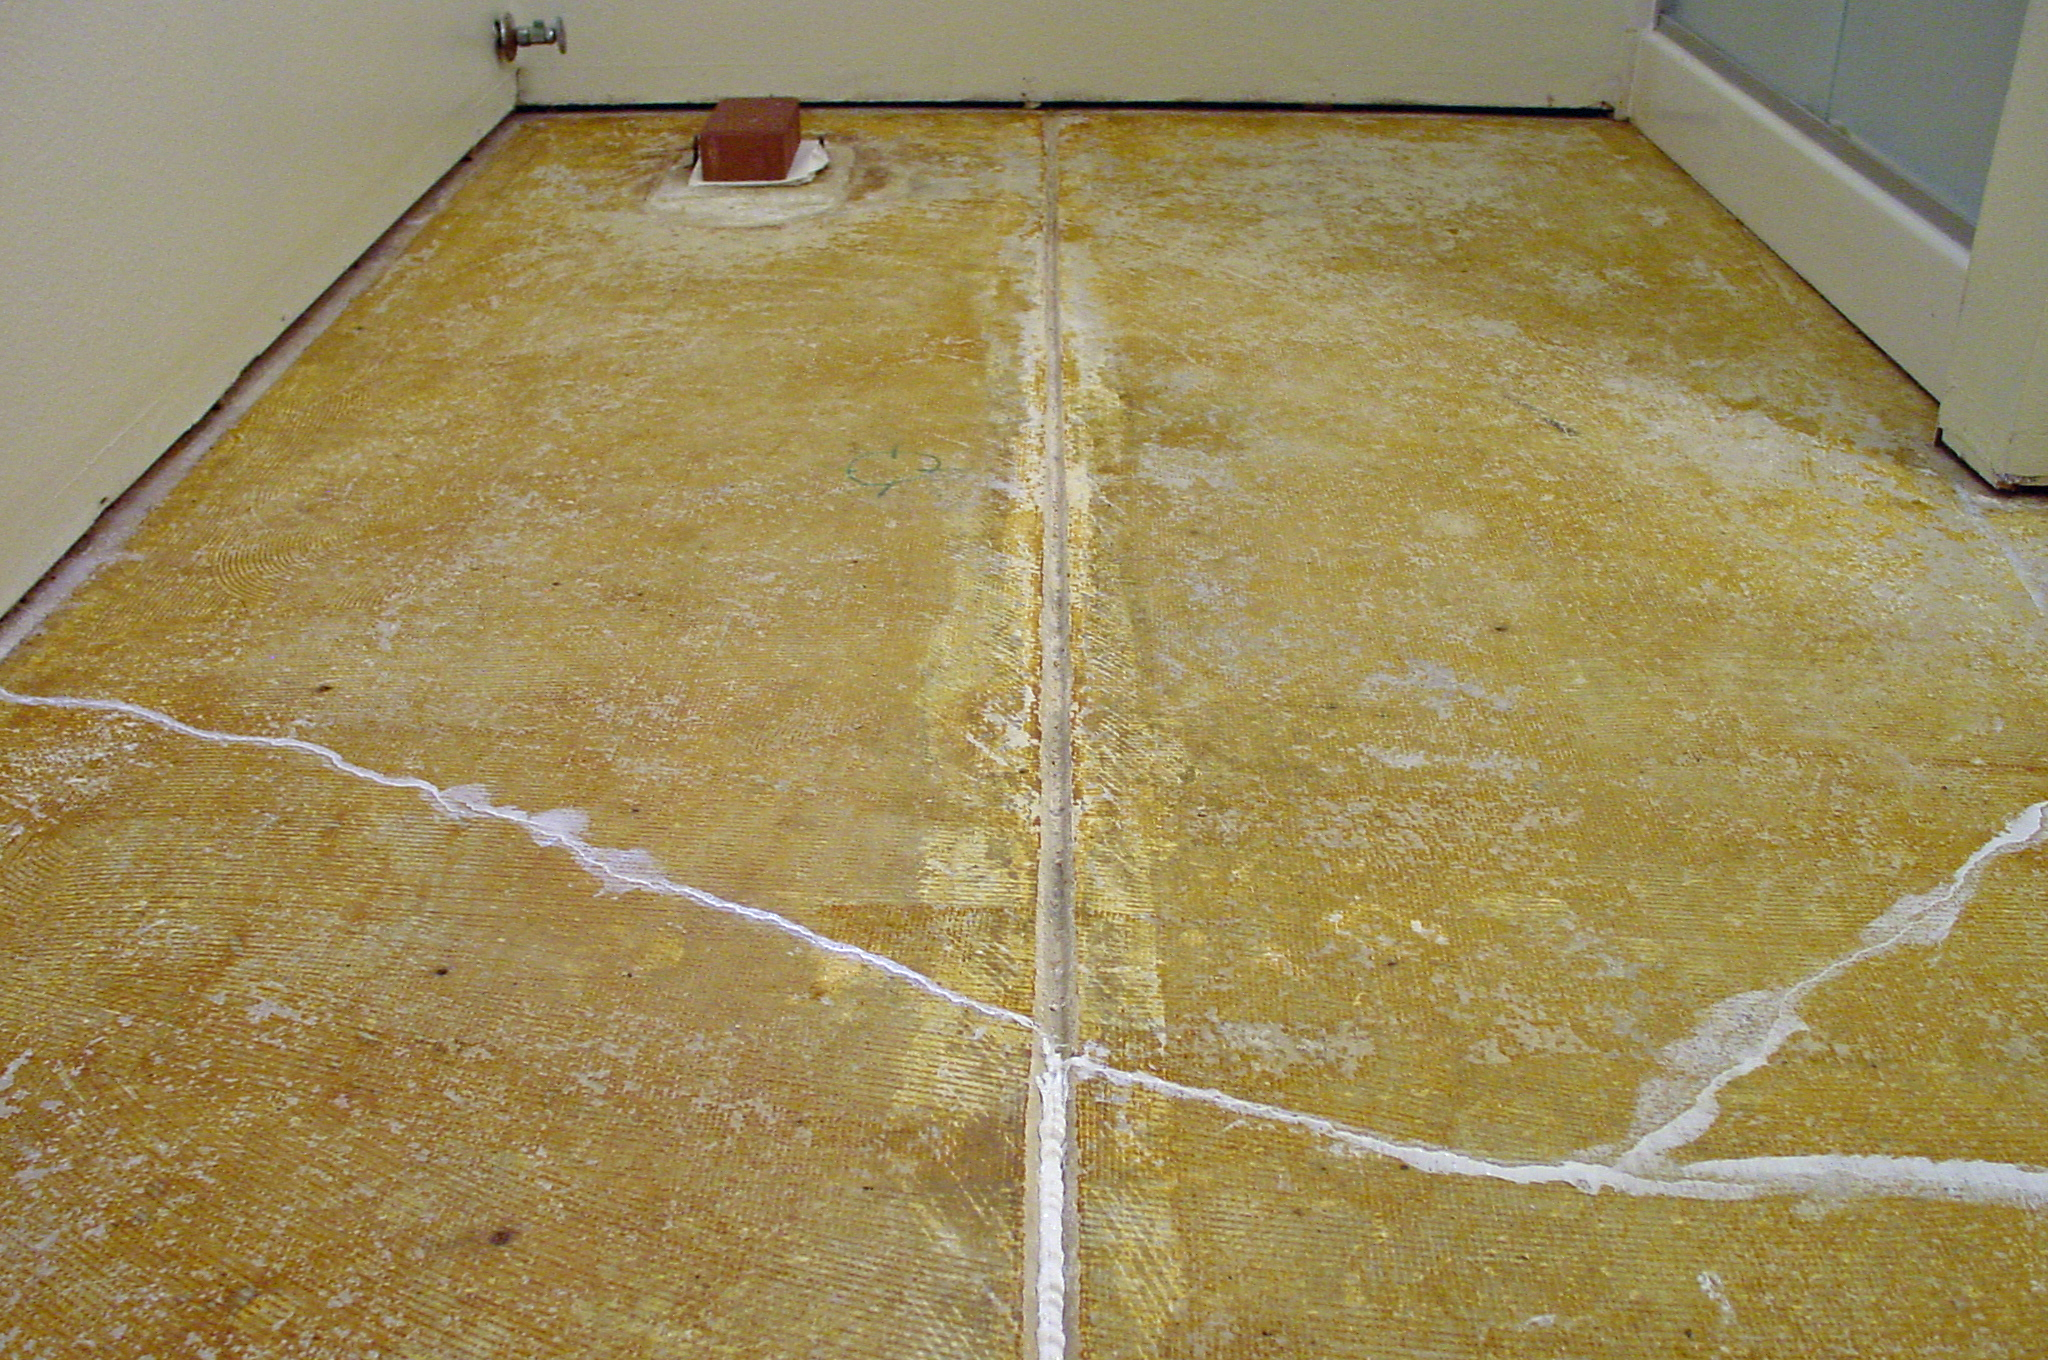 Ceramic Tile Floor Over A Concrete Slab, How To Lay Ceramic Tile On Concrete Floor